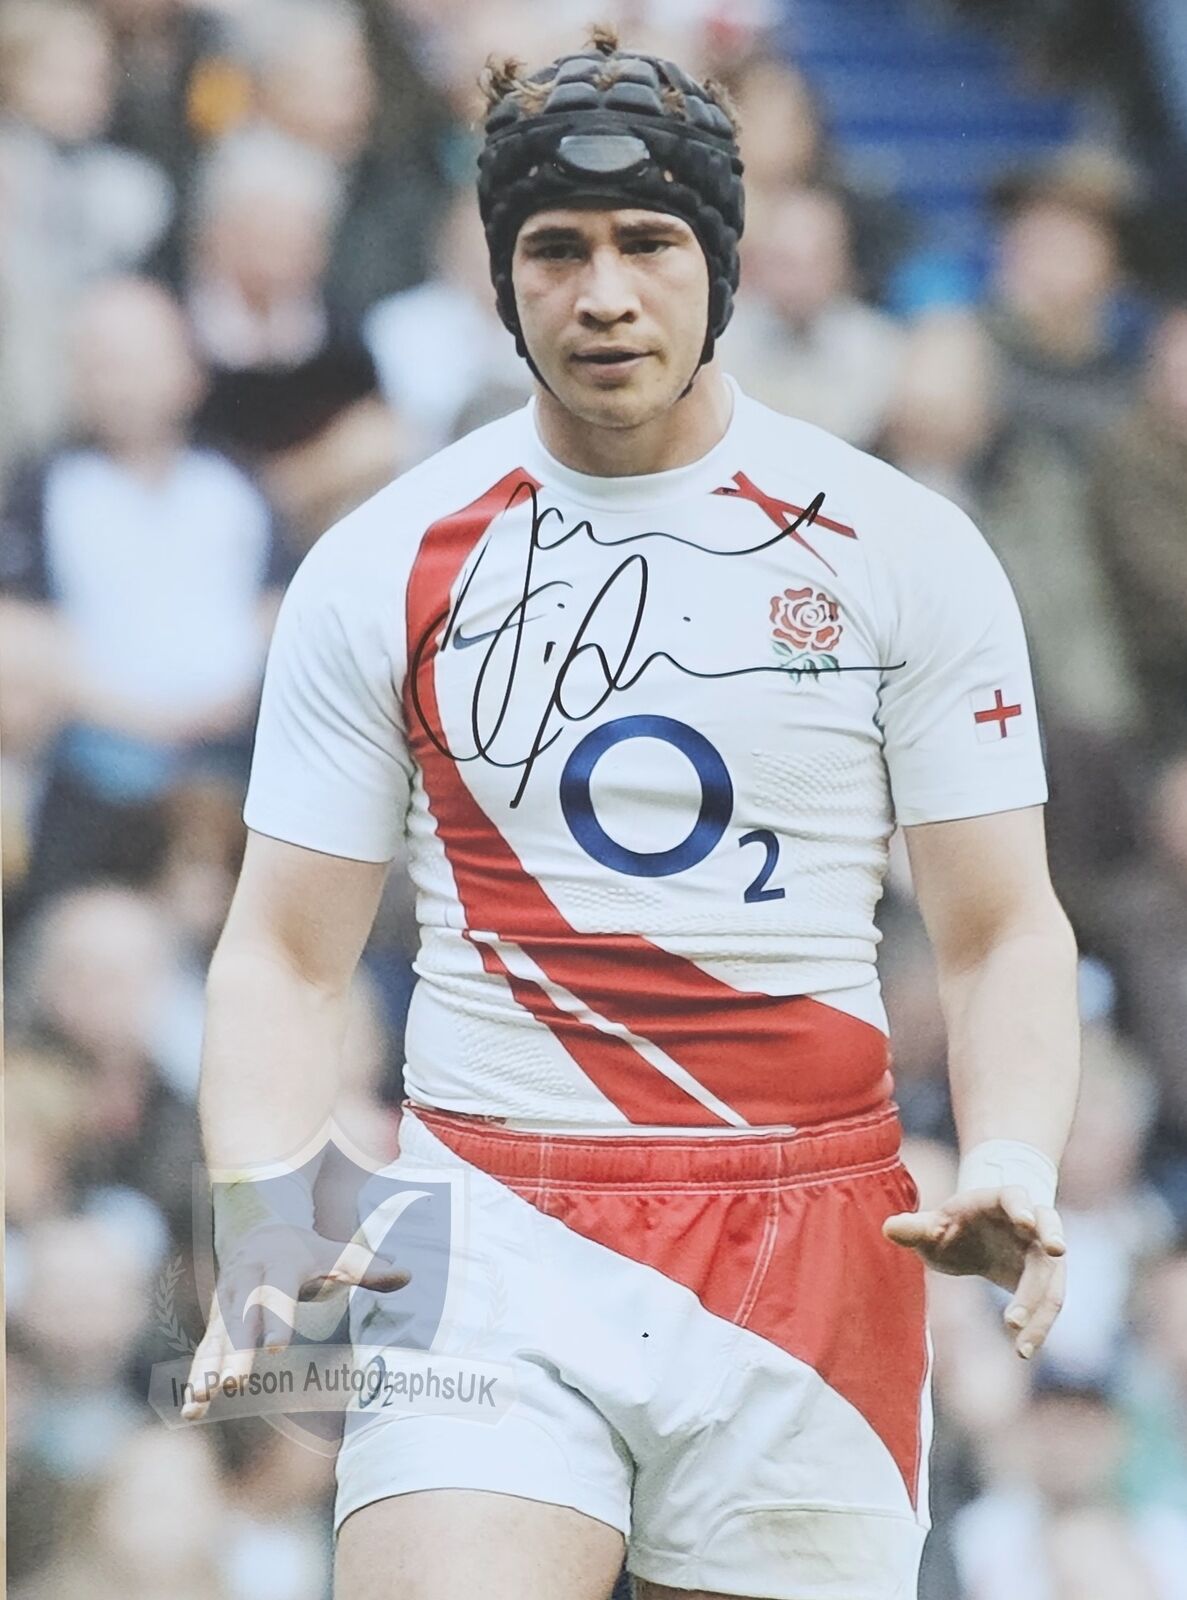 Danny Cipriani ENGLAND RUGBY Signed 16x12 Photo OnlineCOA AFTAL